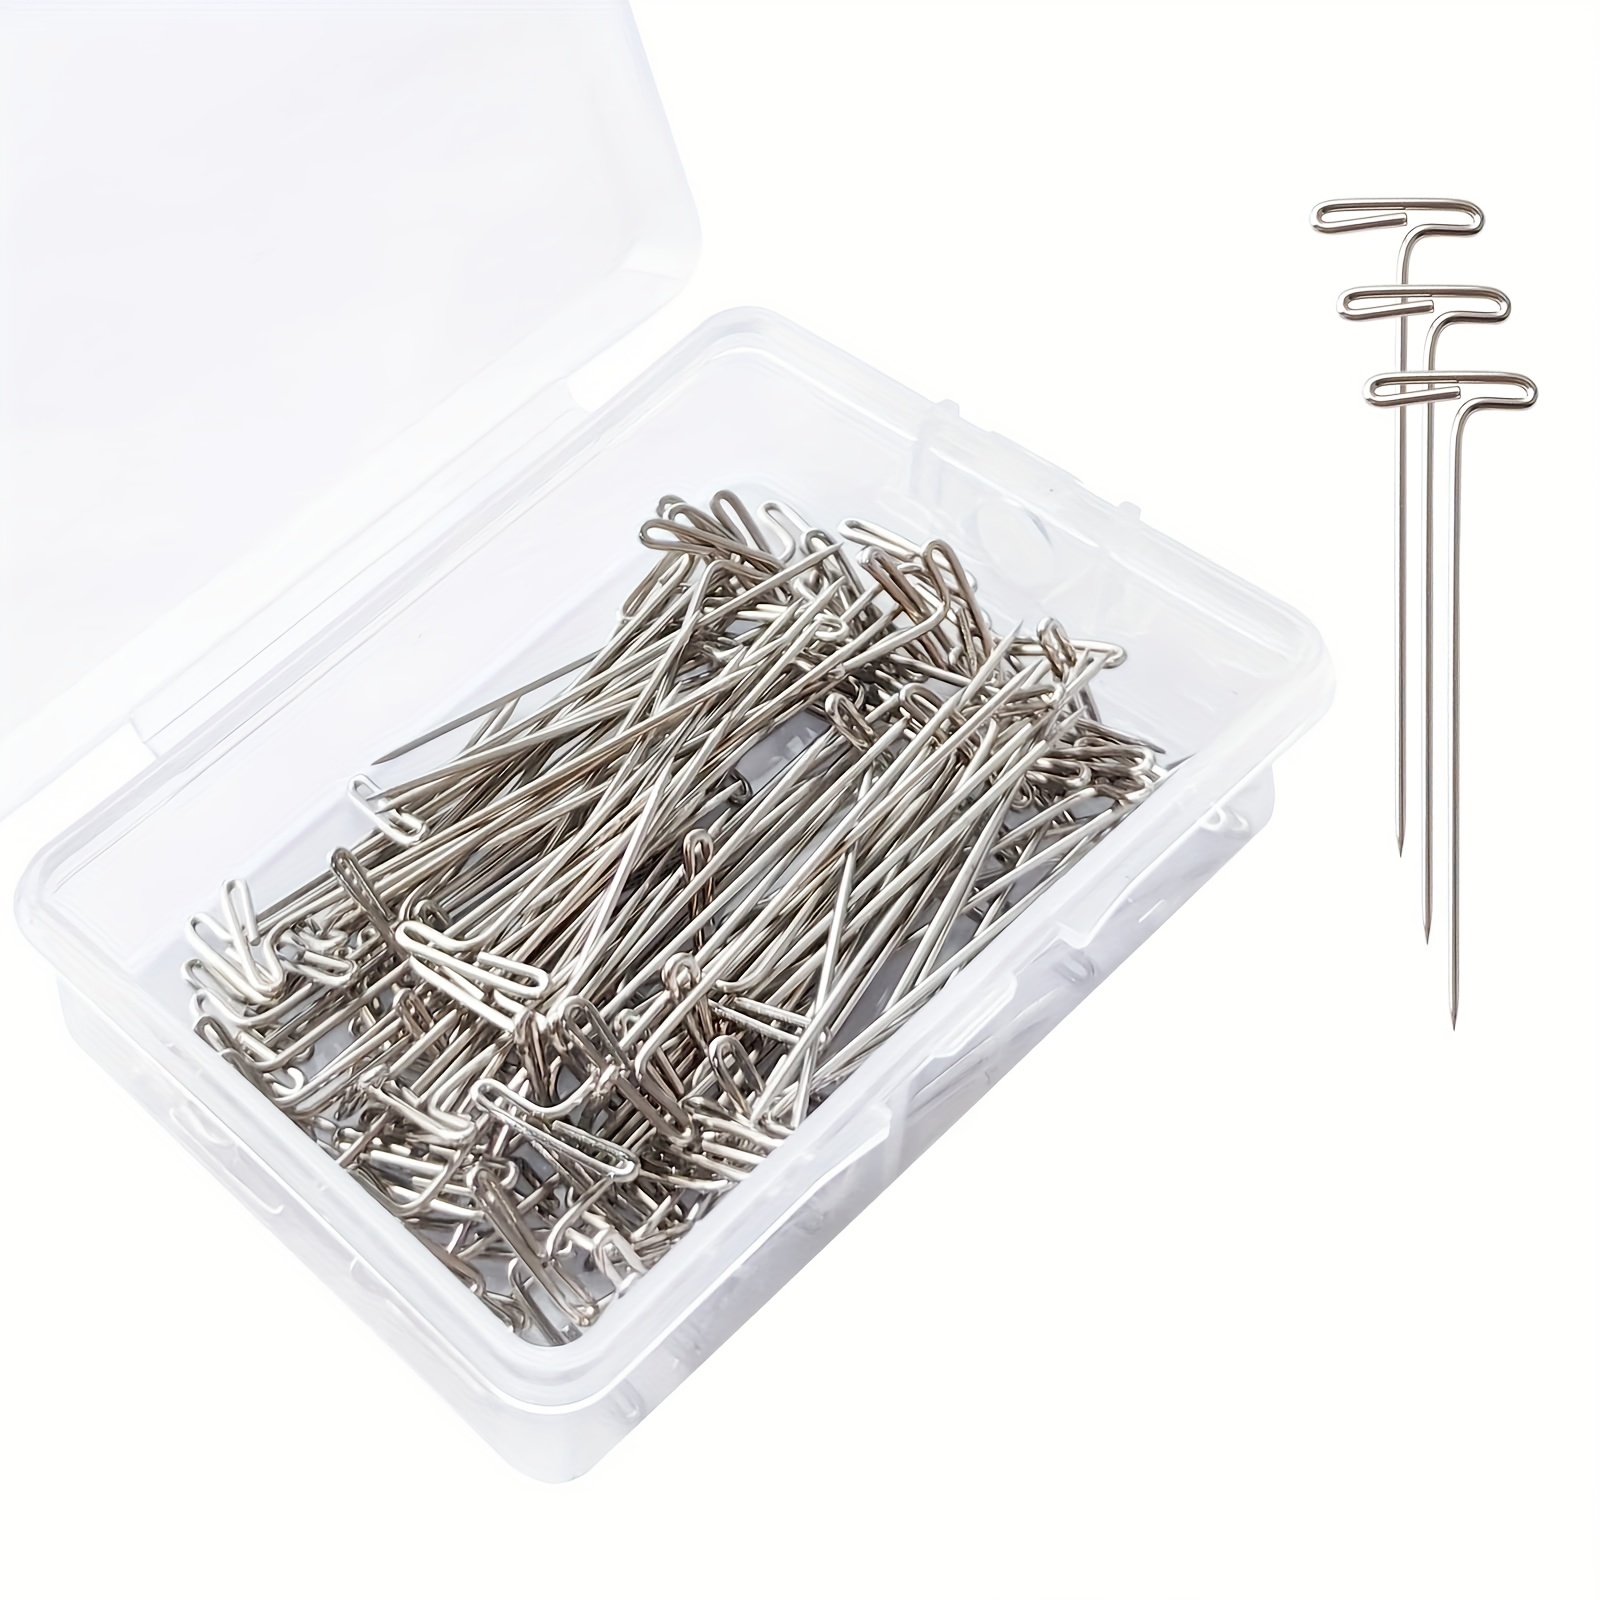 100pcs 1 Inch T-Pins, Stainless Blocking Pin Needles for Knitting, Silver